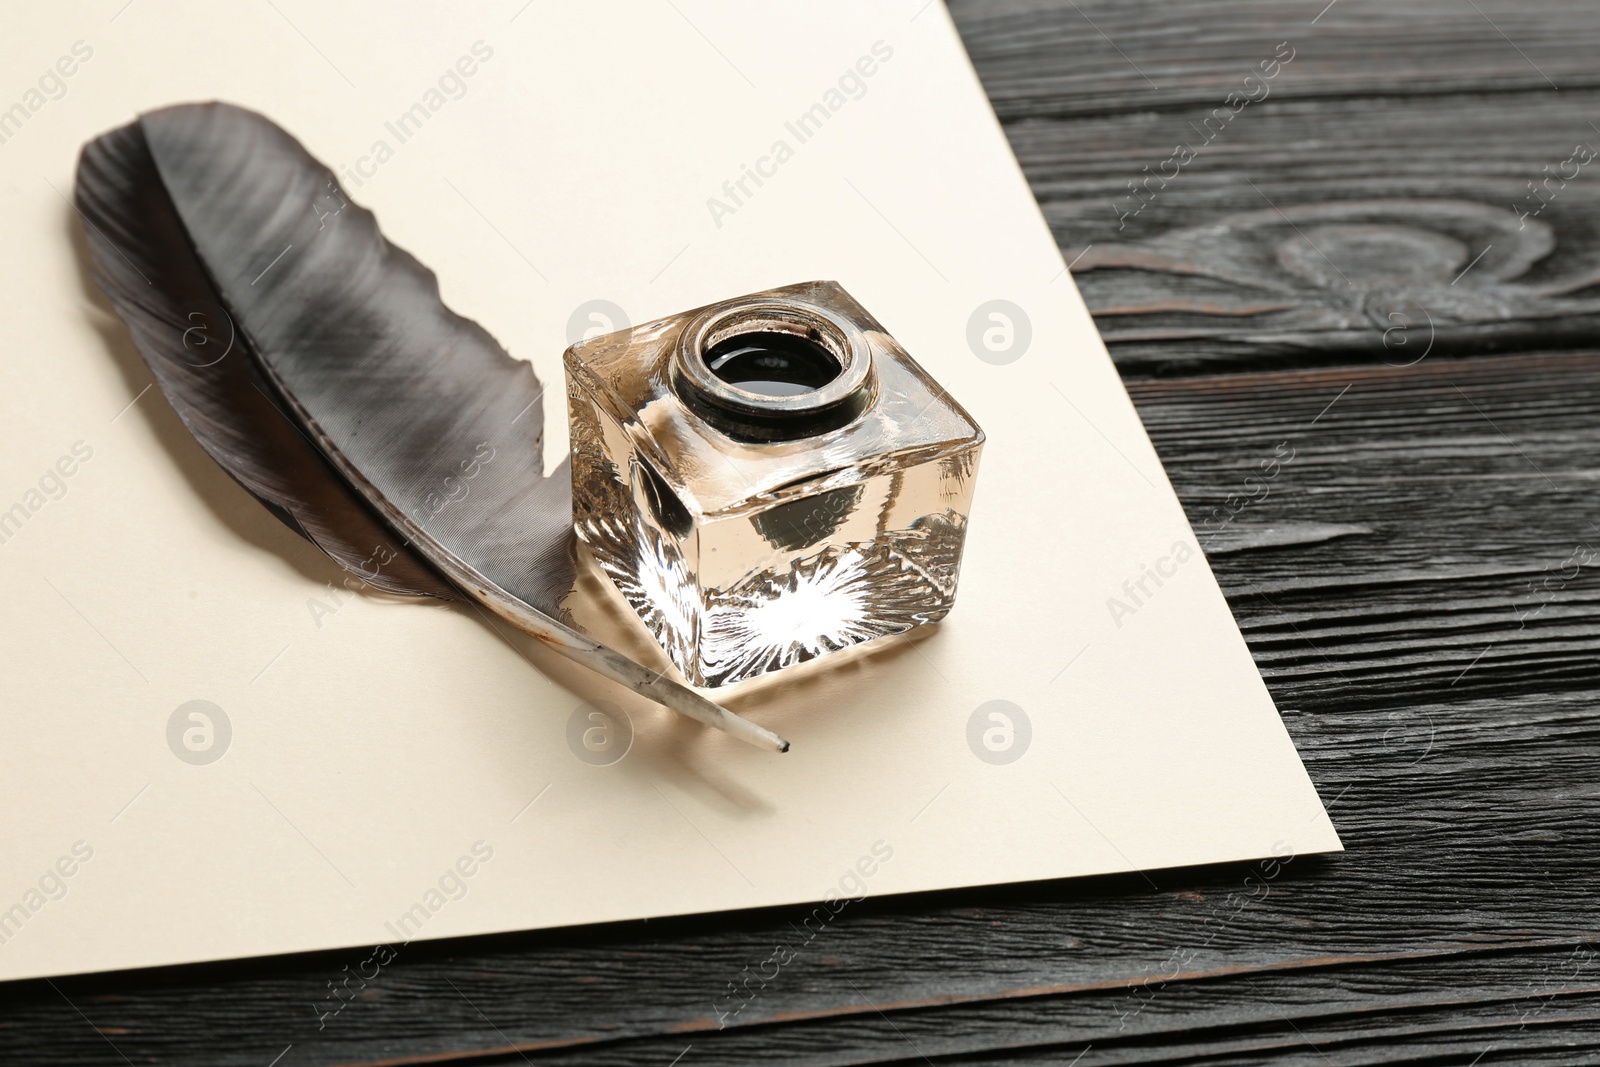 Photo of Feather pen, inkwell and blank parchment on wooden table